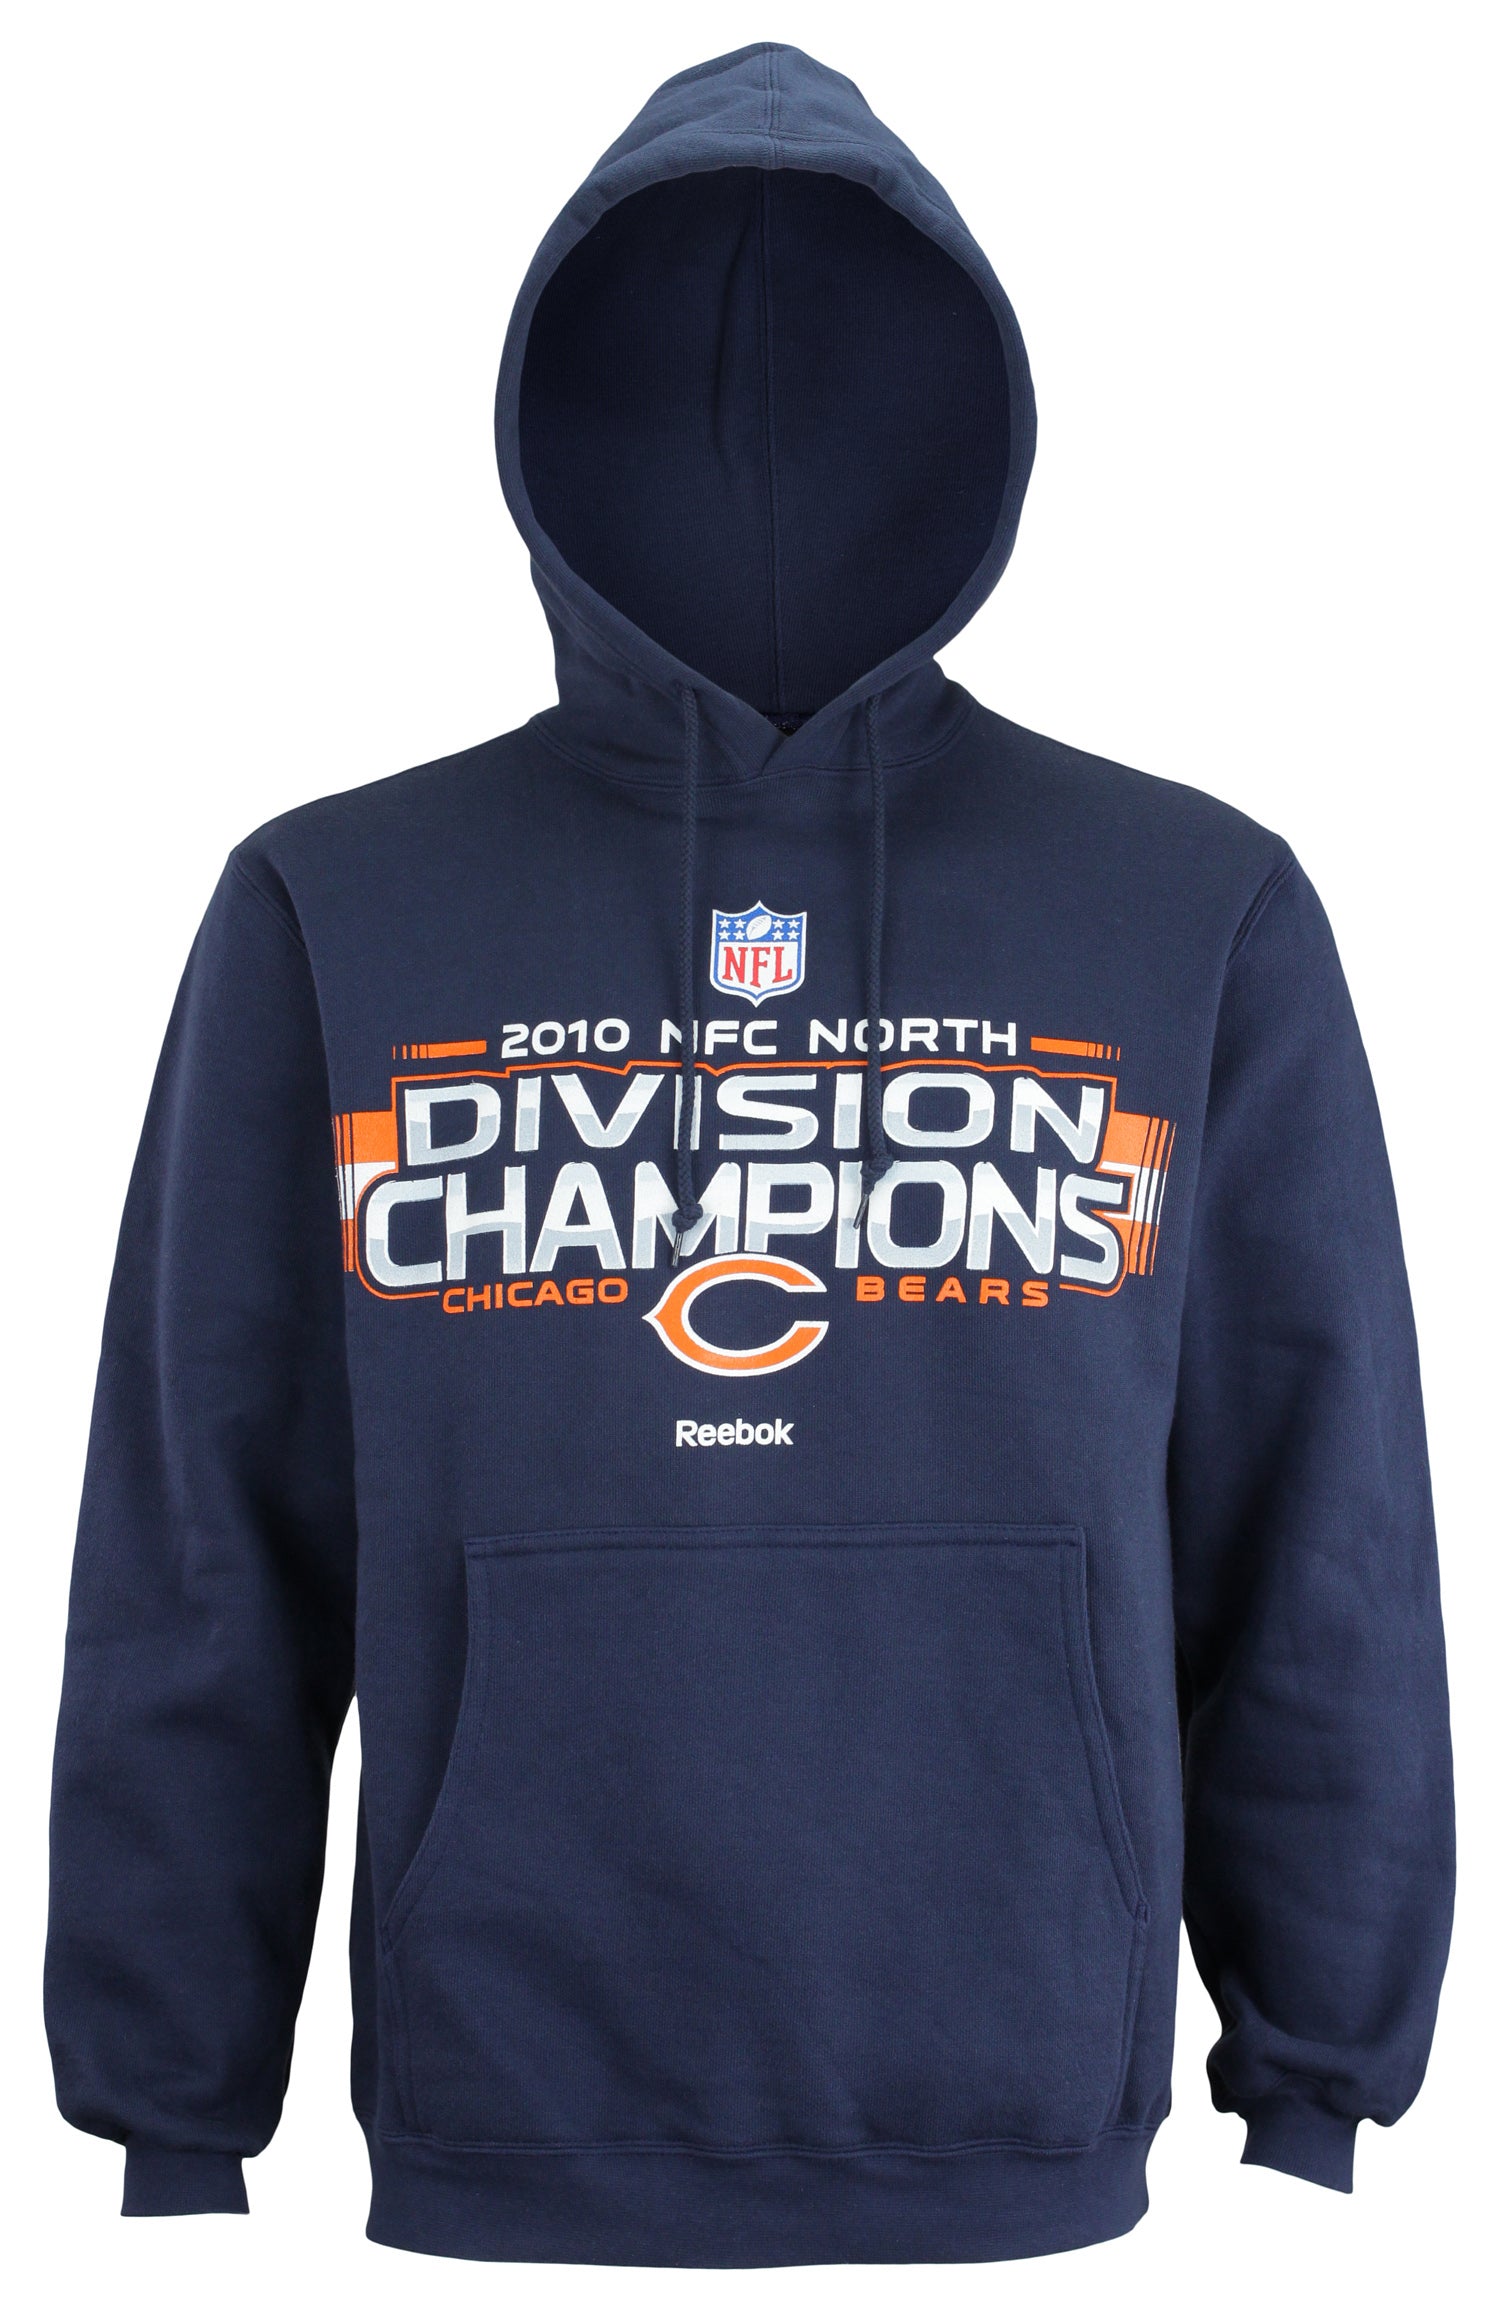 NFL Football Men's Chicago Bears 2010 NFC North Division Champions